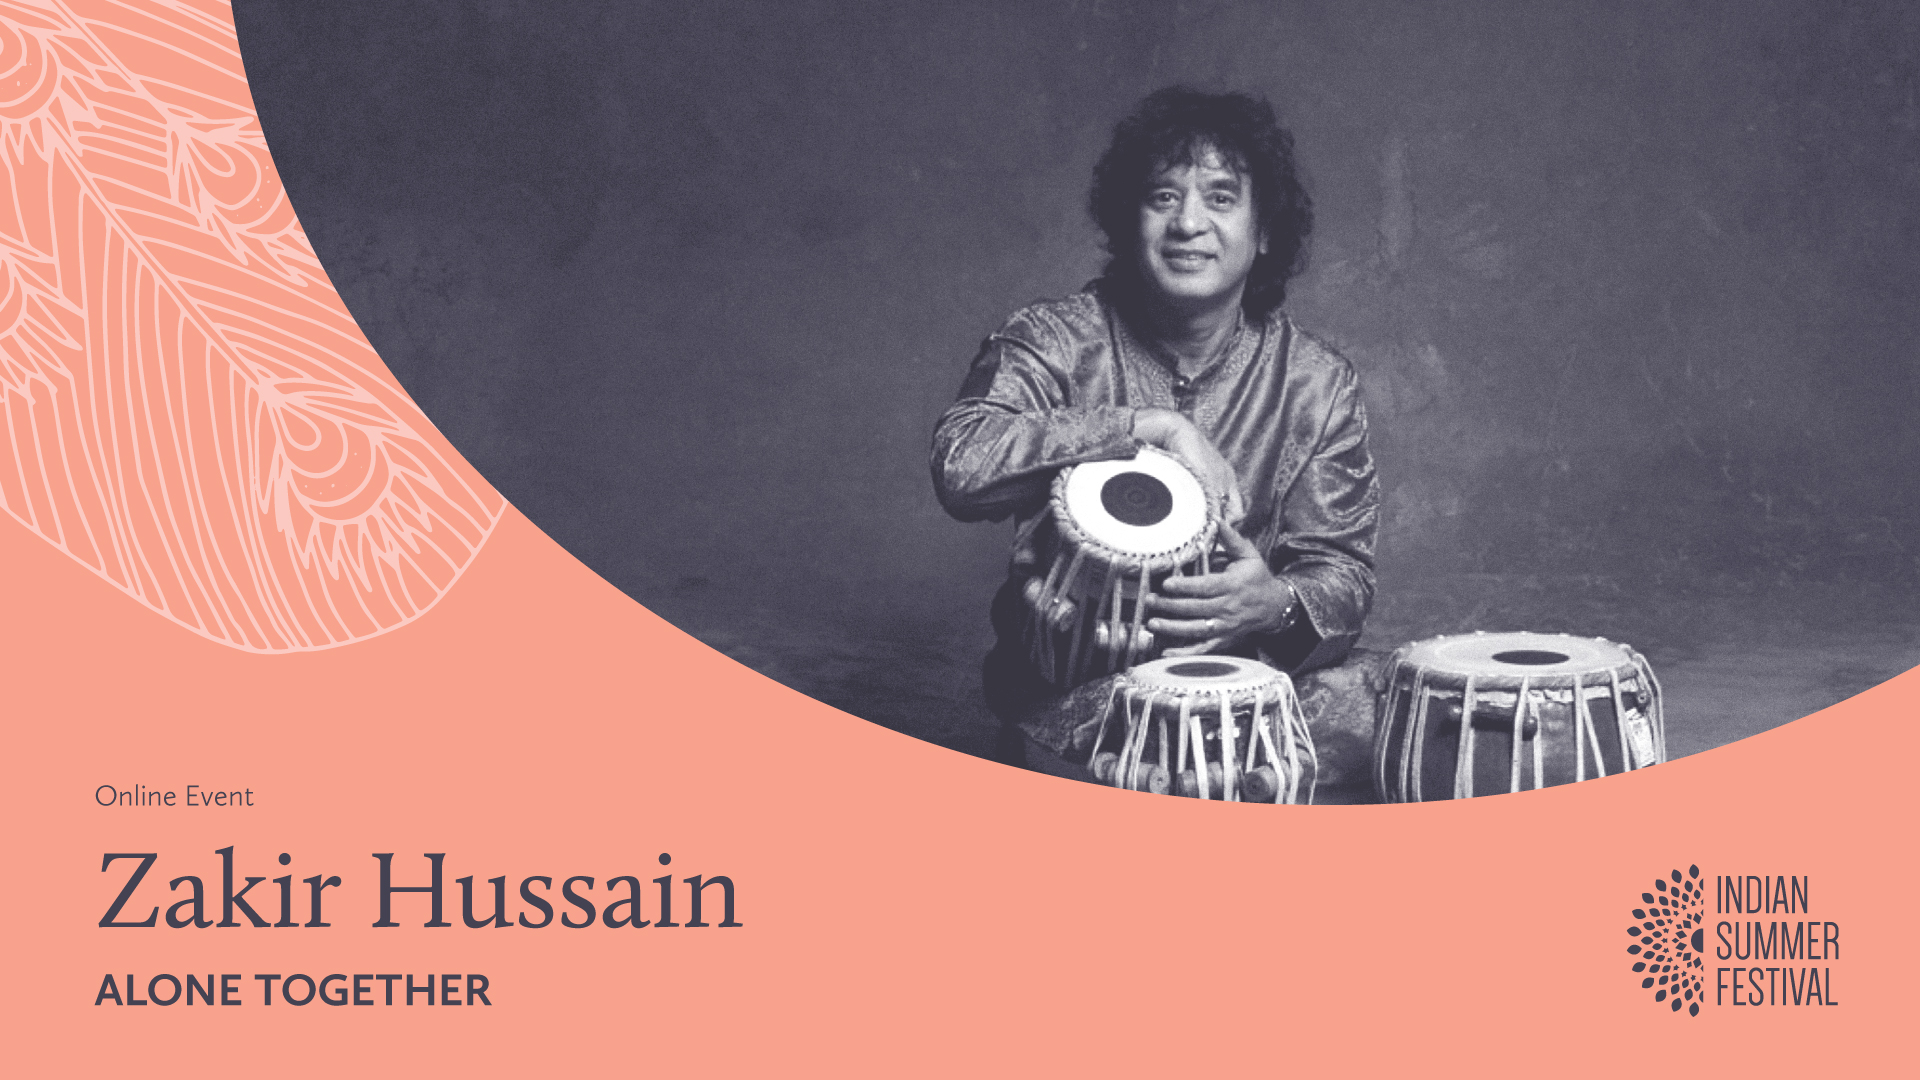 Online Event banner for Zakir Hussain's Alone Together event.